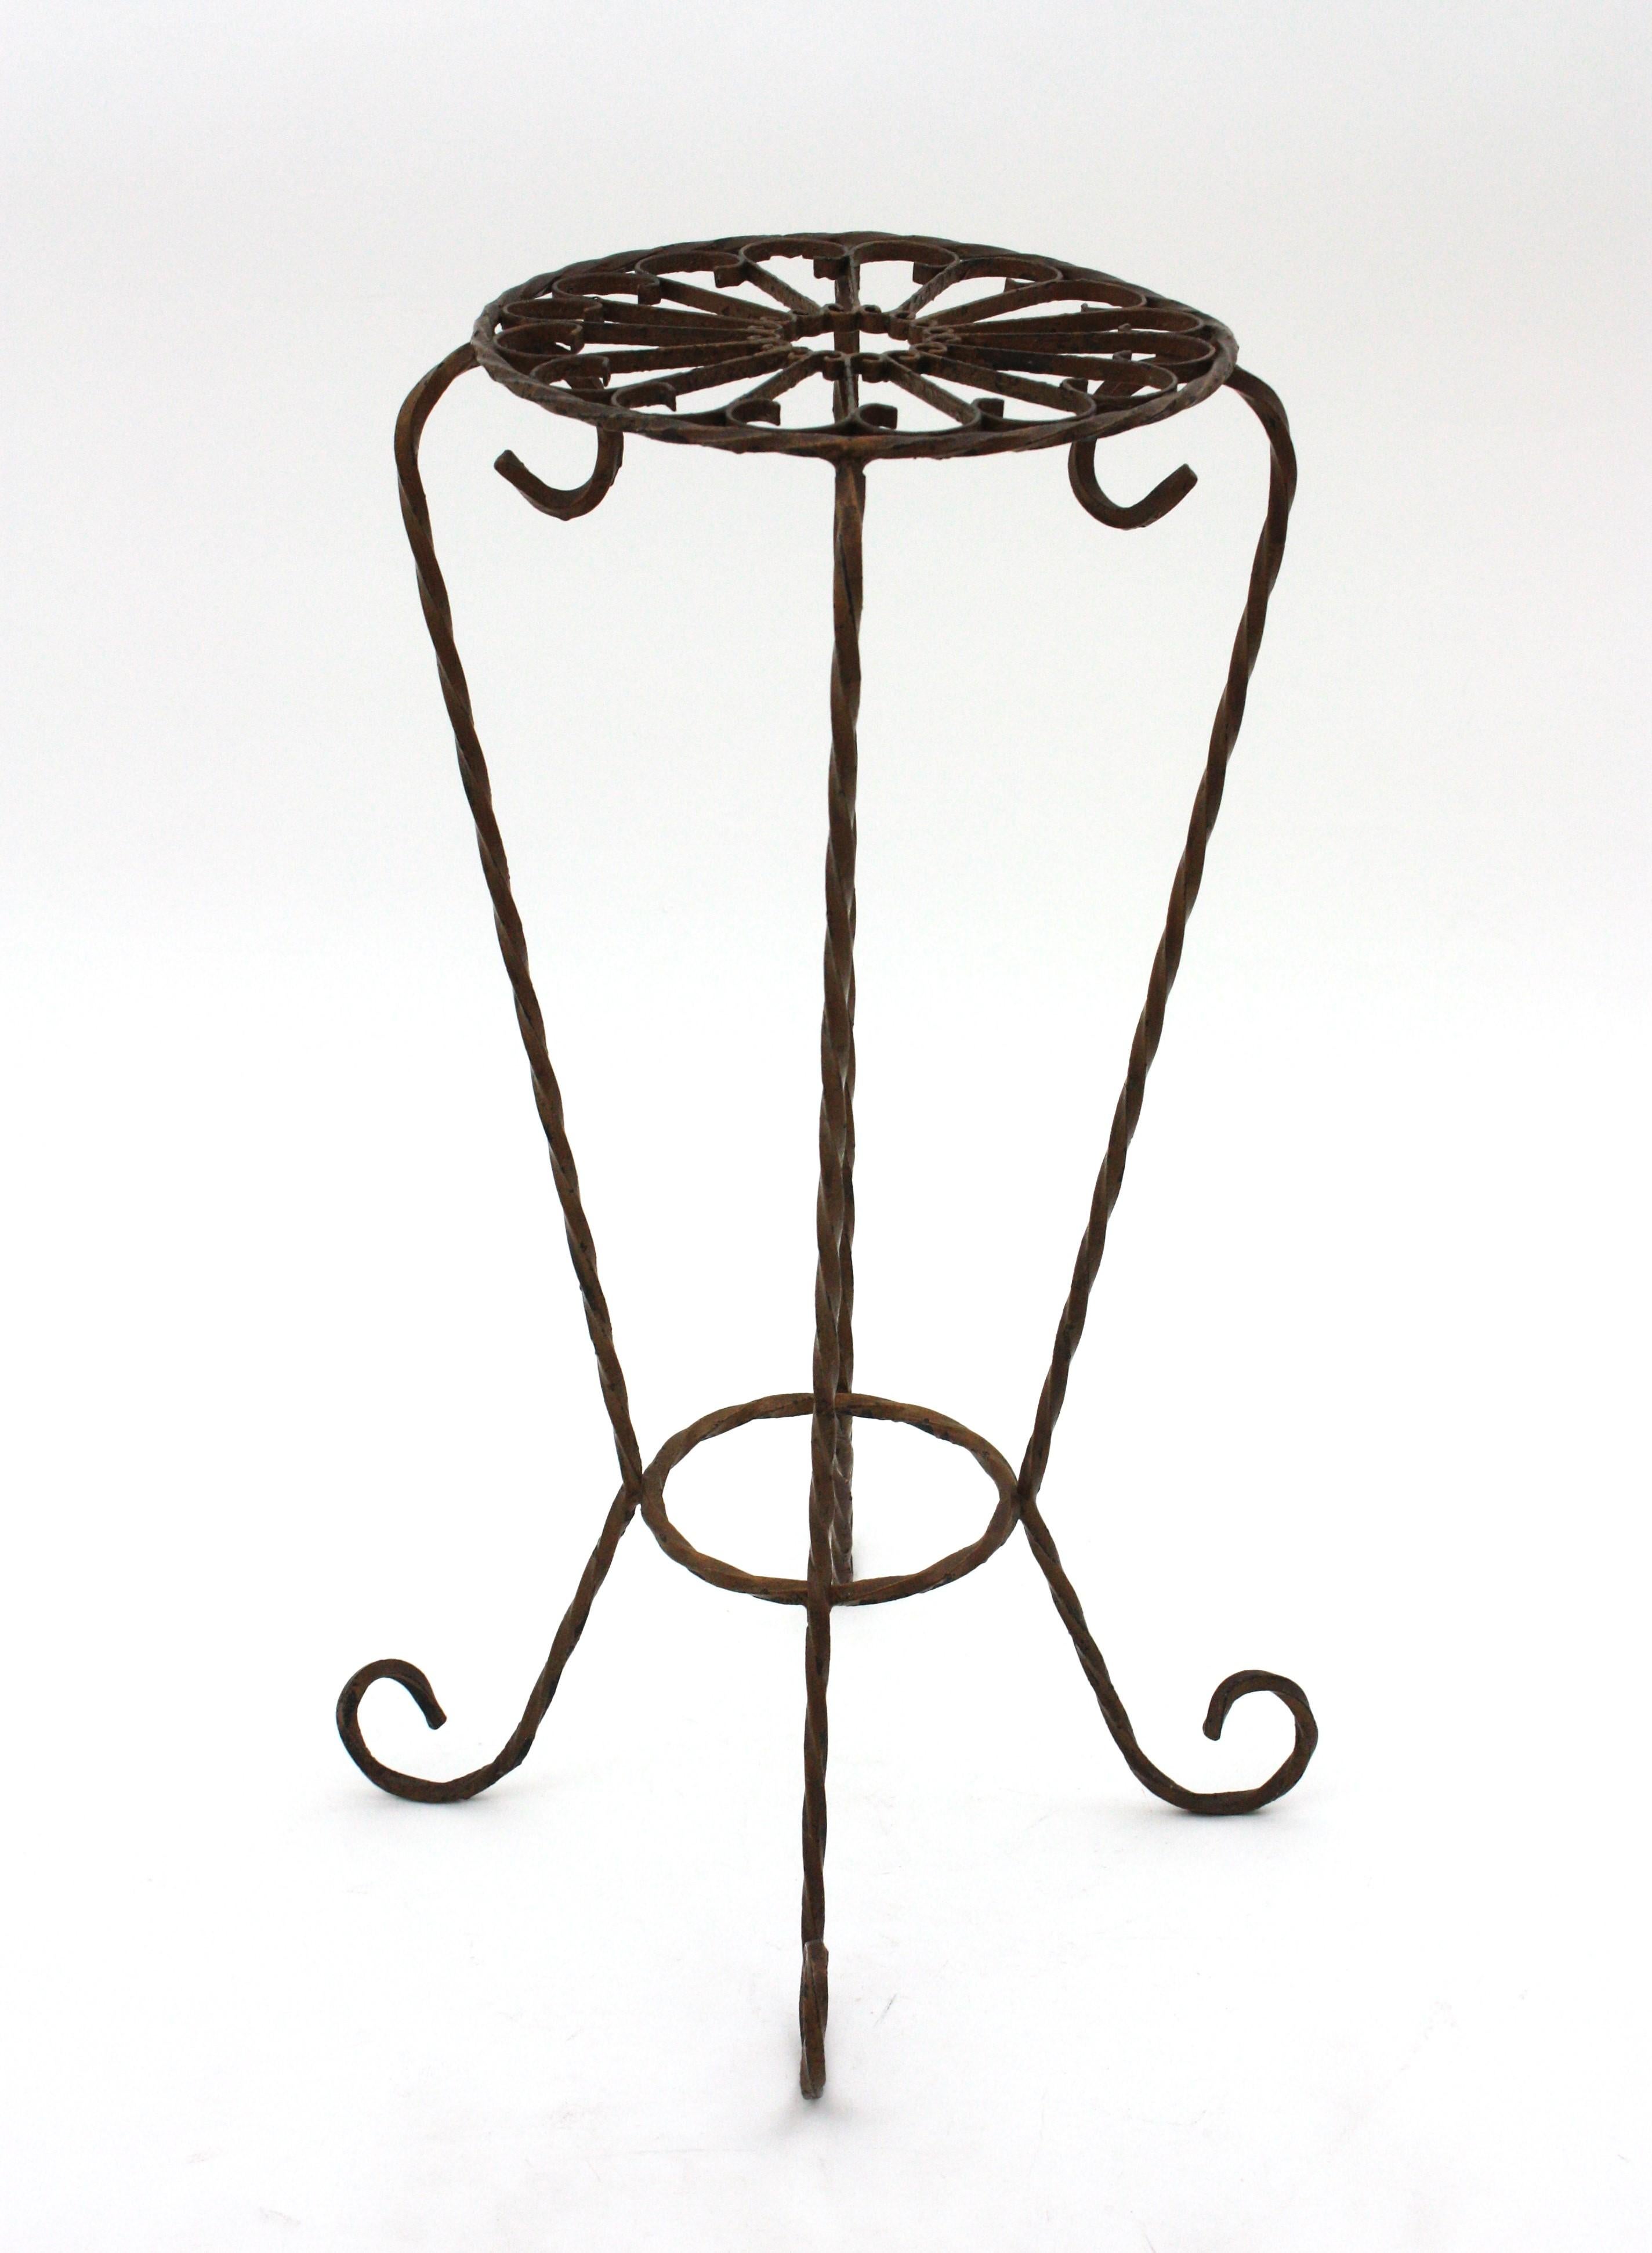 Spanish Scrollwork Wrought Iron Side Table / Drinks Table, 1950s For Sale 7